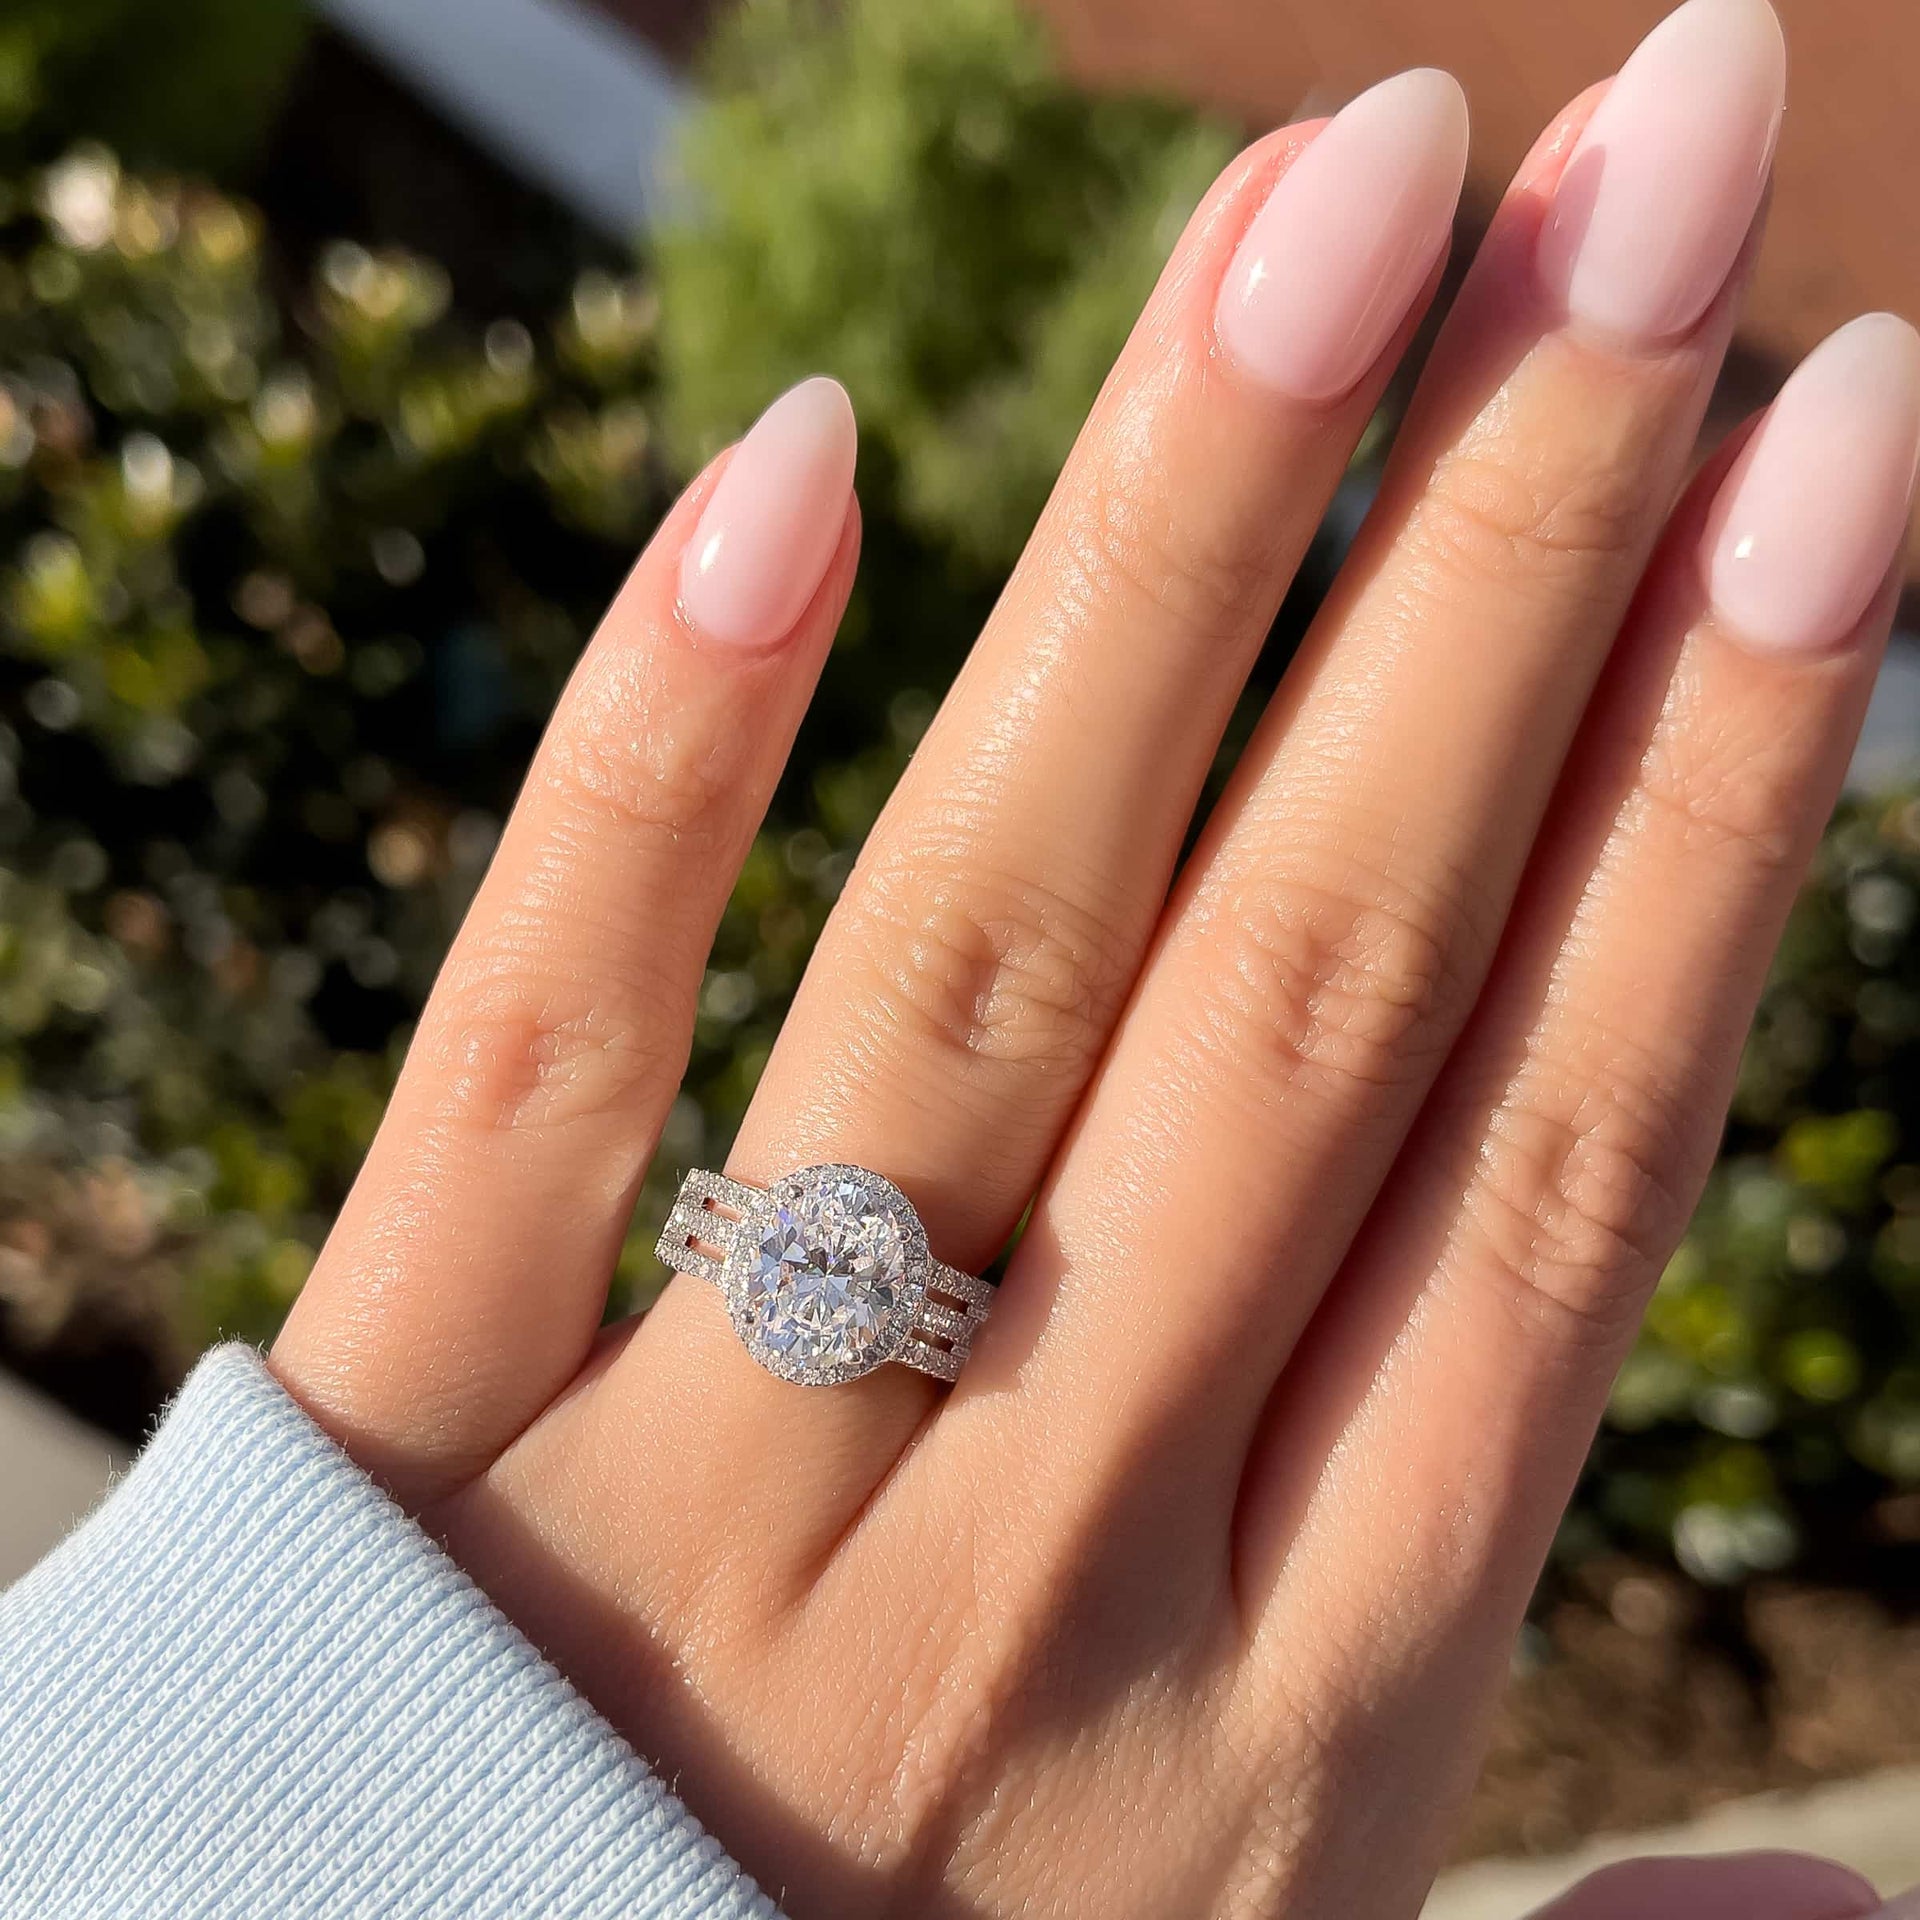 silver queen engagement ring on ladies hand